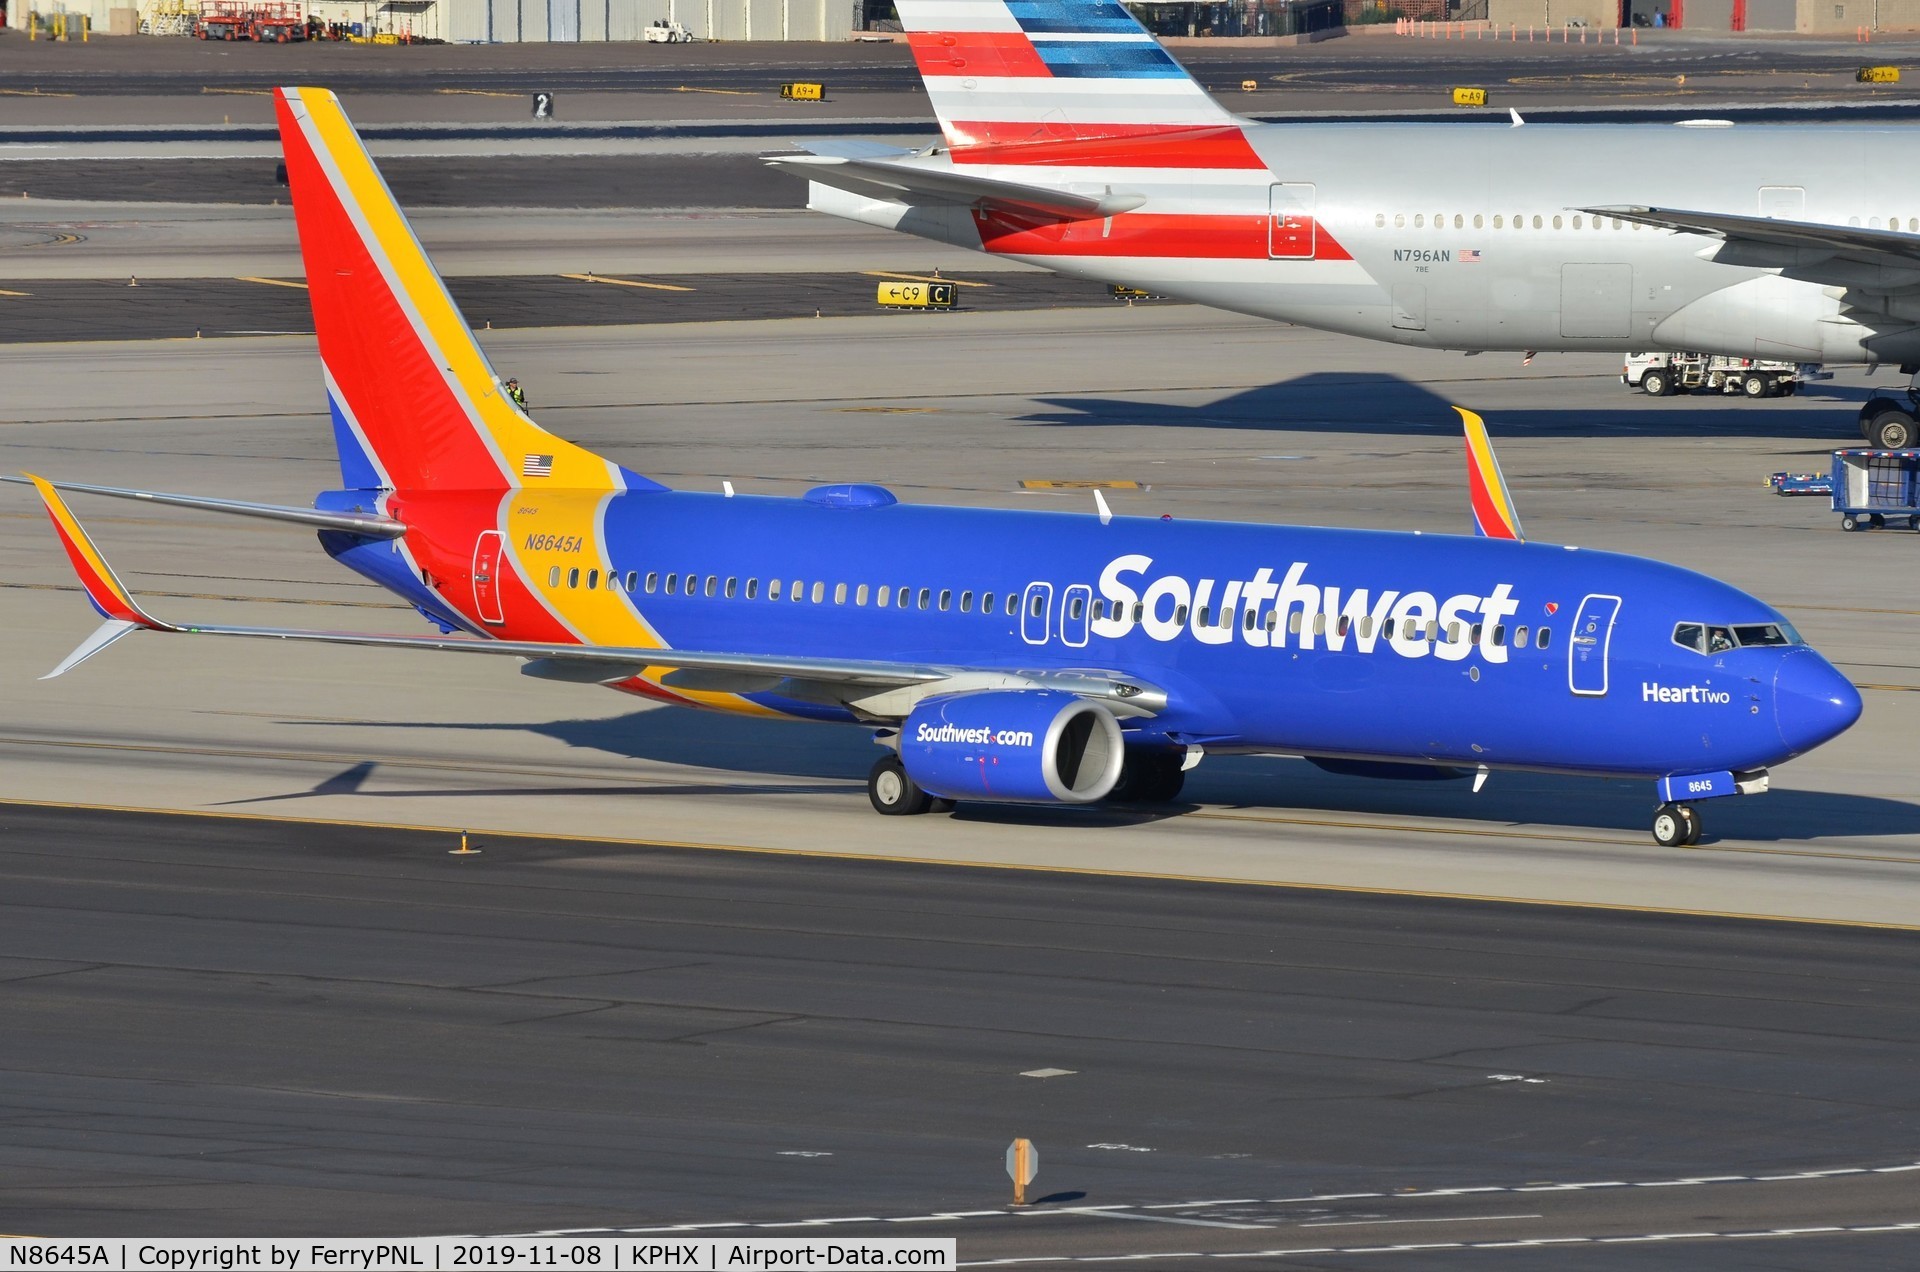 N8645A, 2014 Boeing 737-8H4 C/N 36907, Southwest HardTwo  B738 arrived in PHX